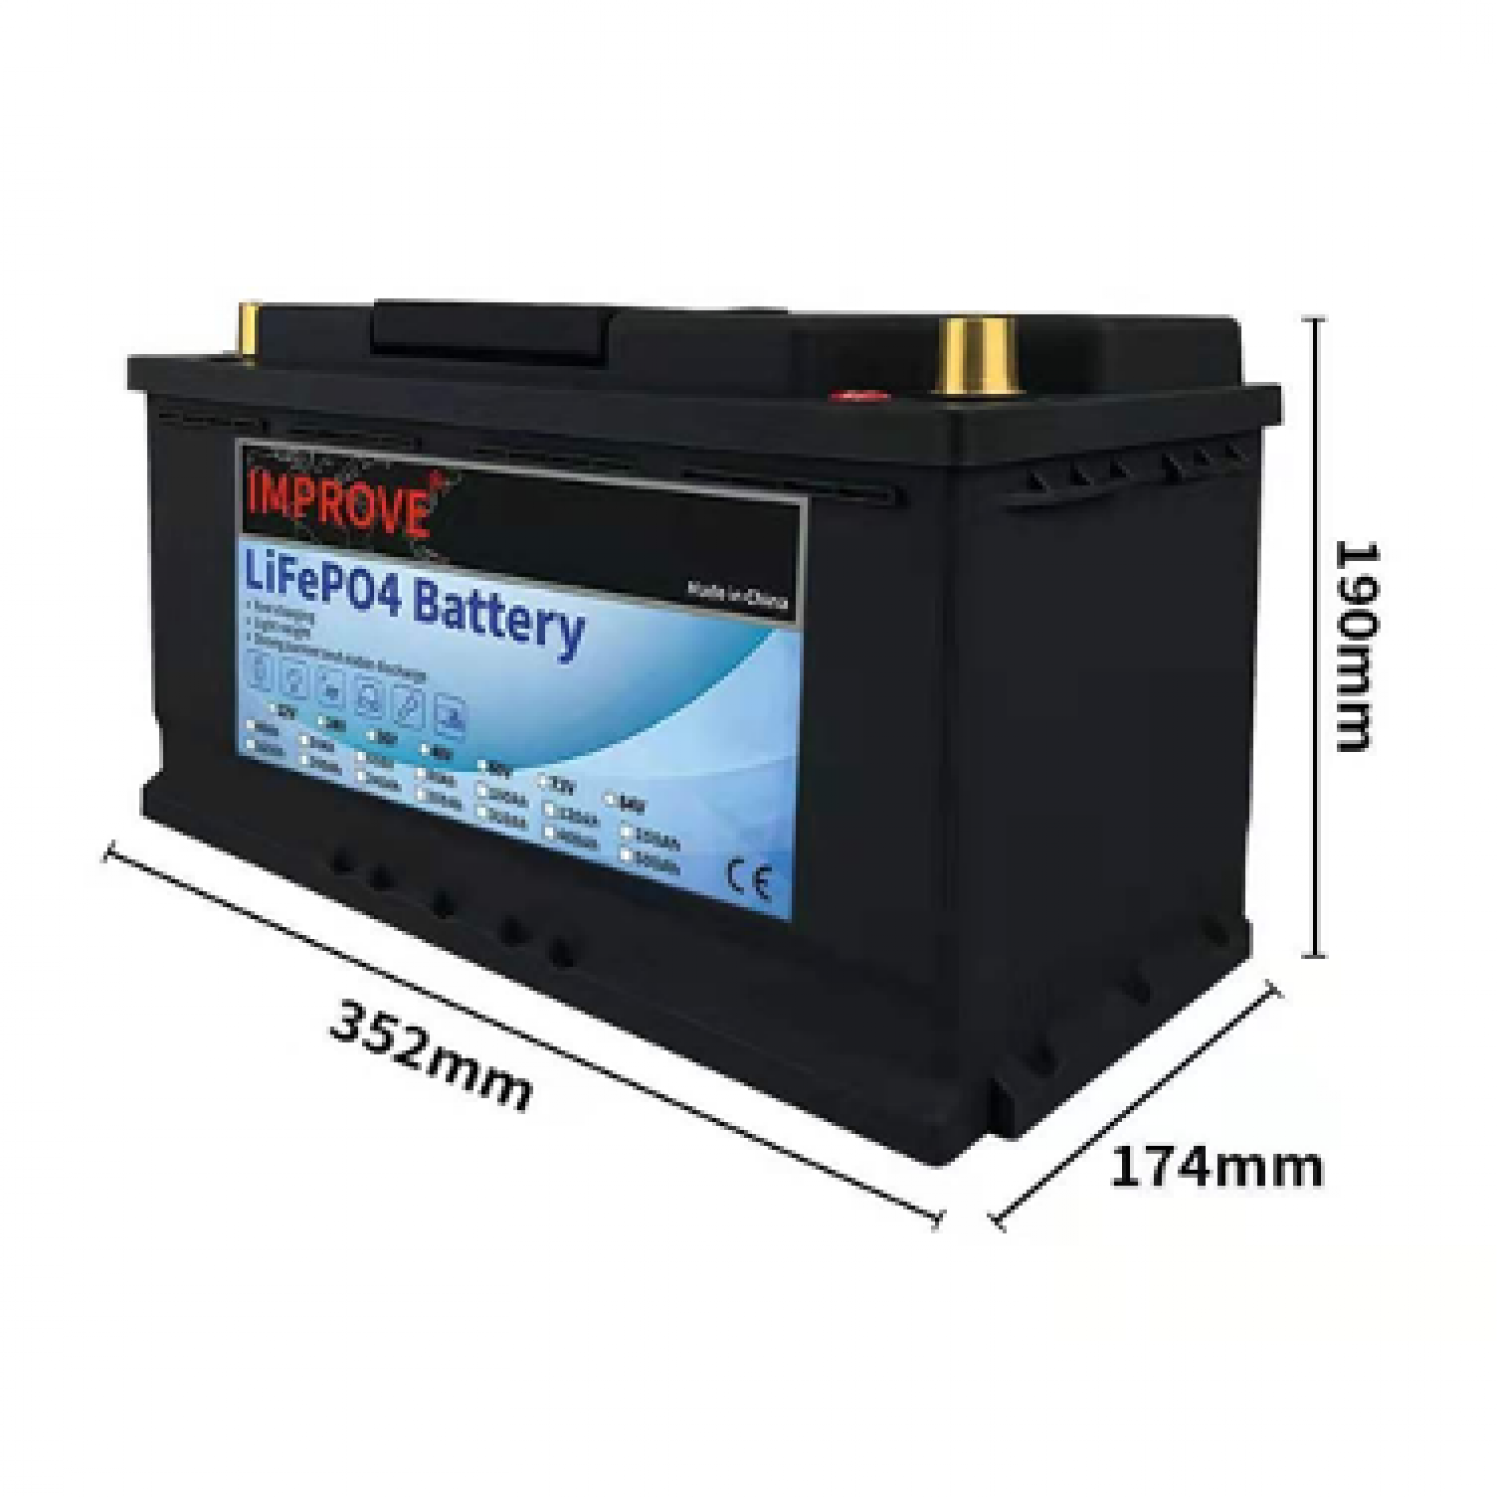 Our 36V100ah Lithium Battery Supplies Power for Your Weekend!